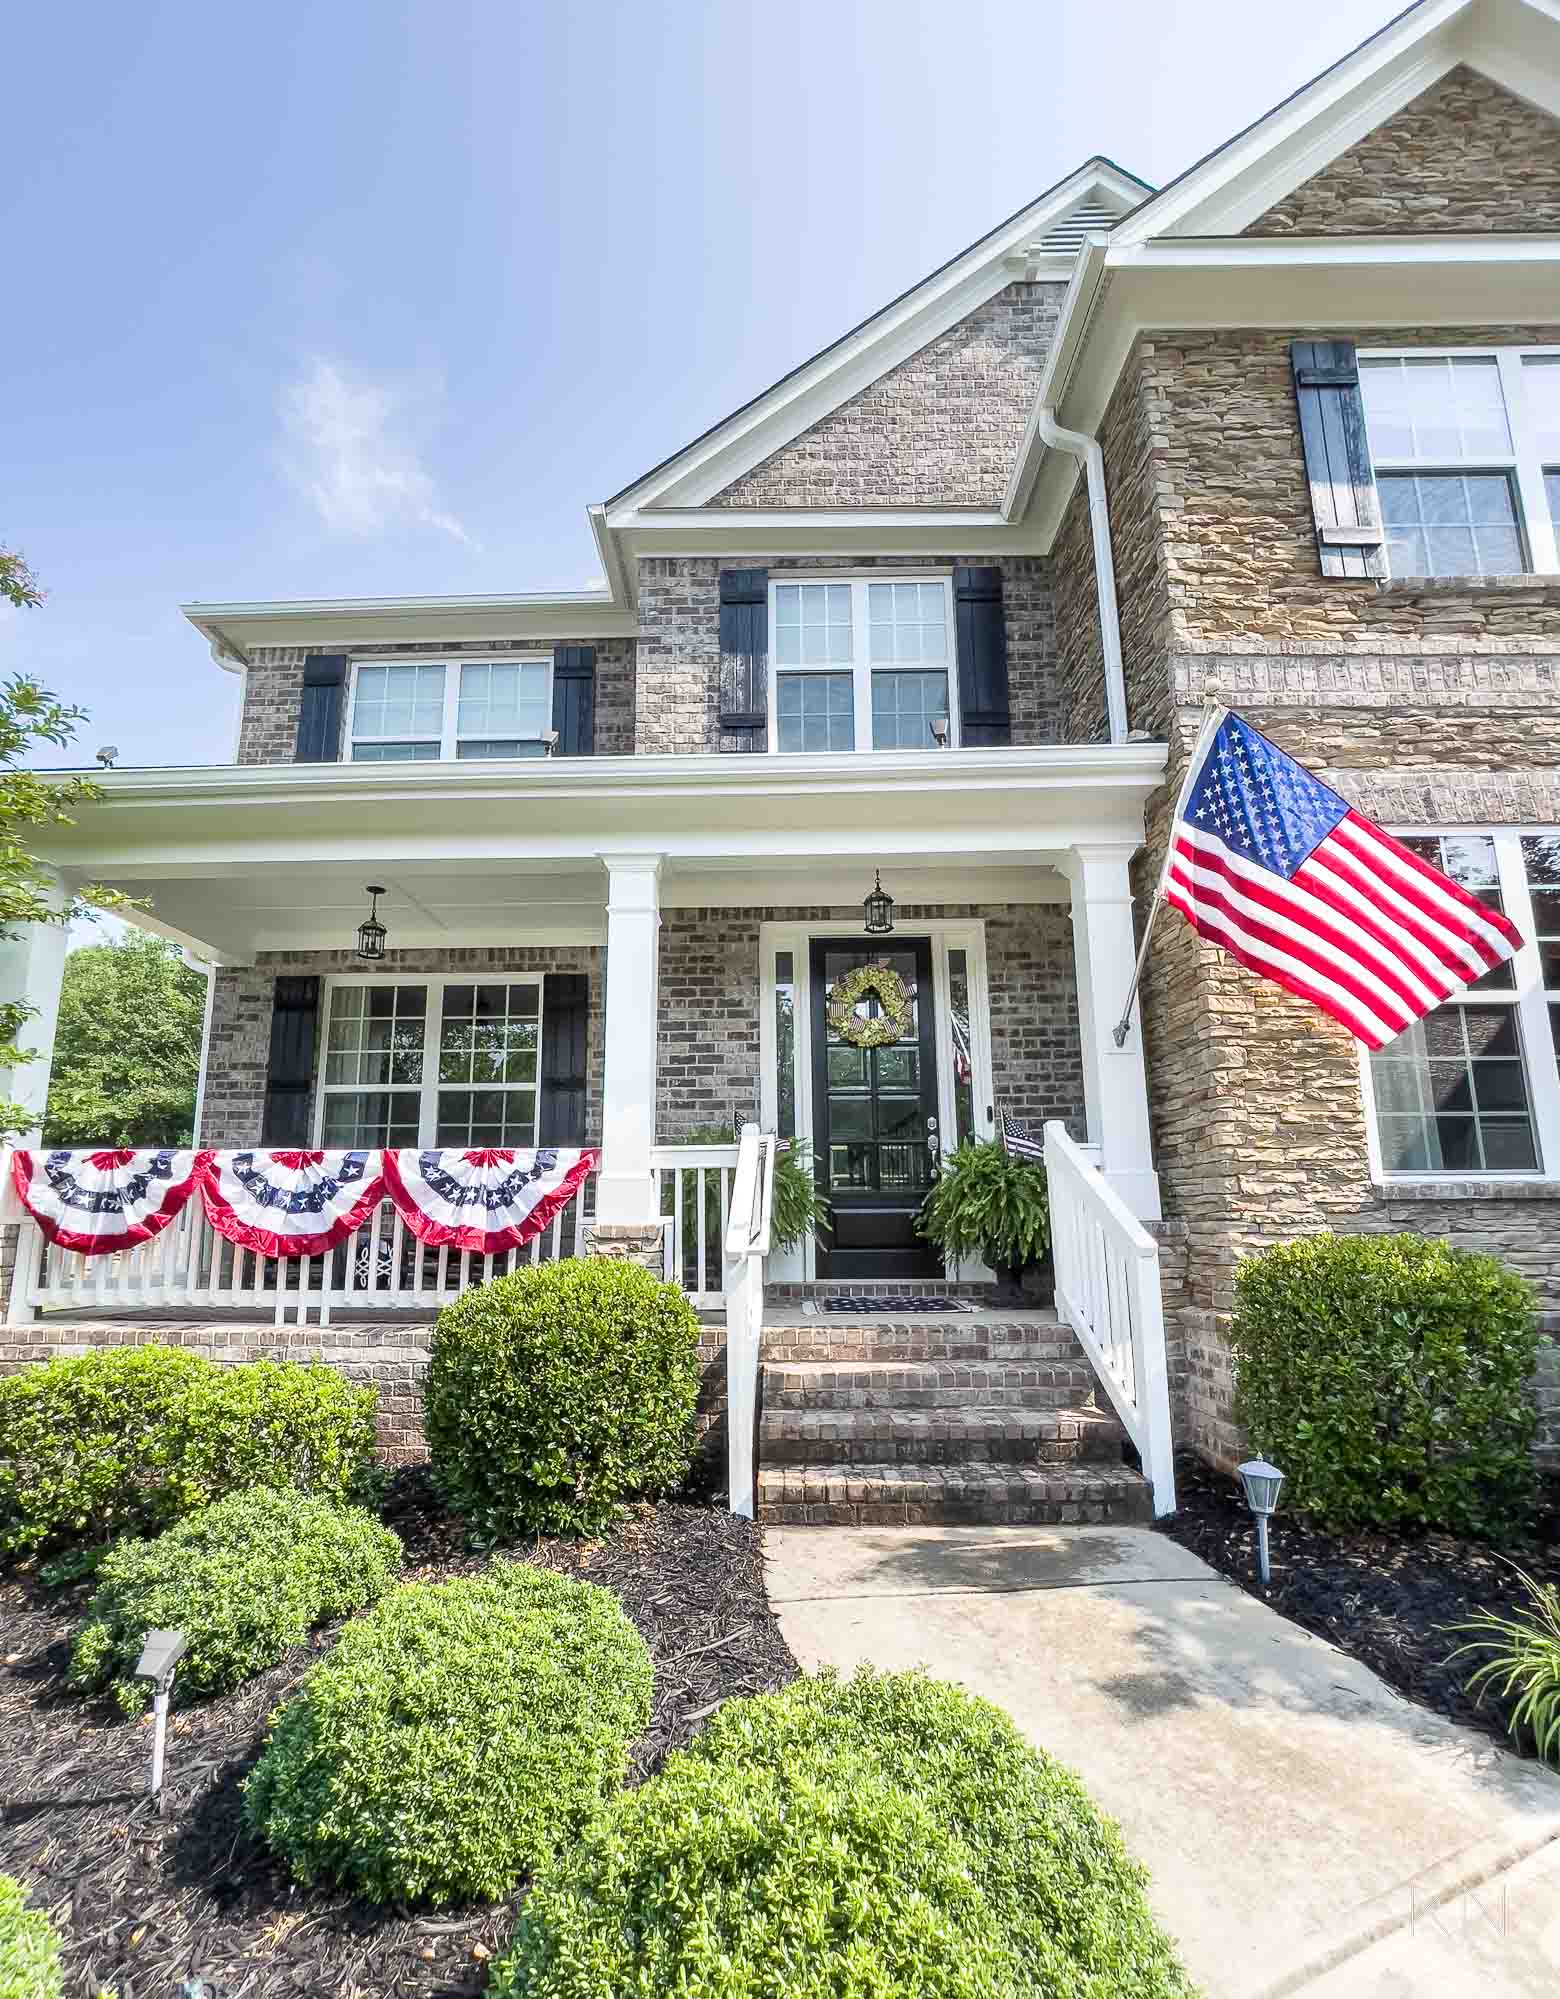 4th of July Outdoor Decorations and Patriotic Decor Ideas in Under 30 Minutes!